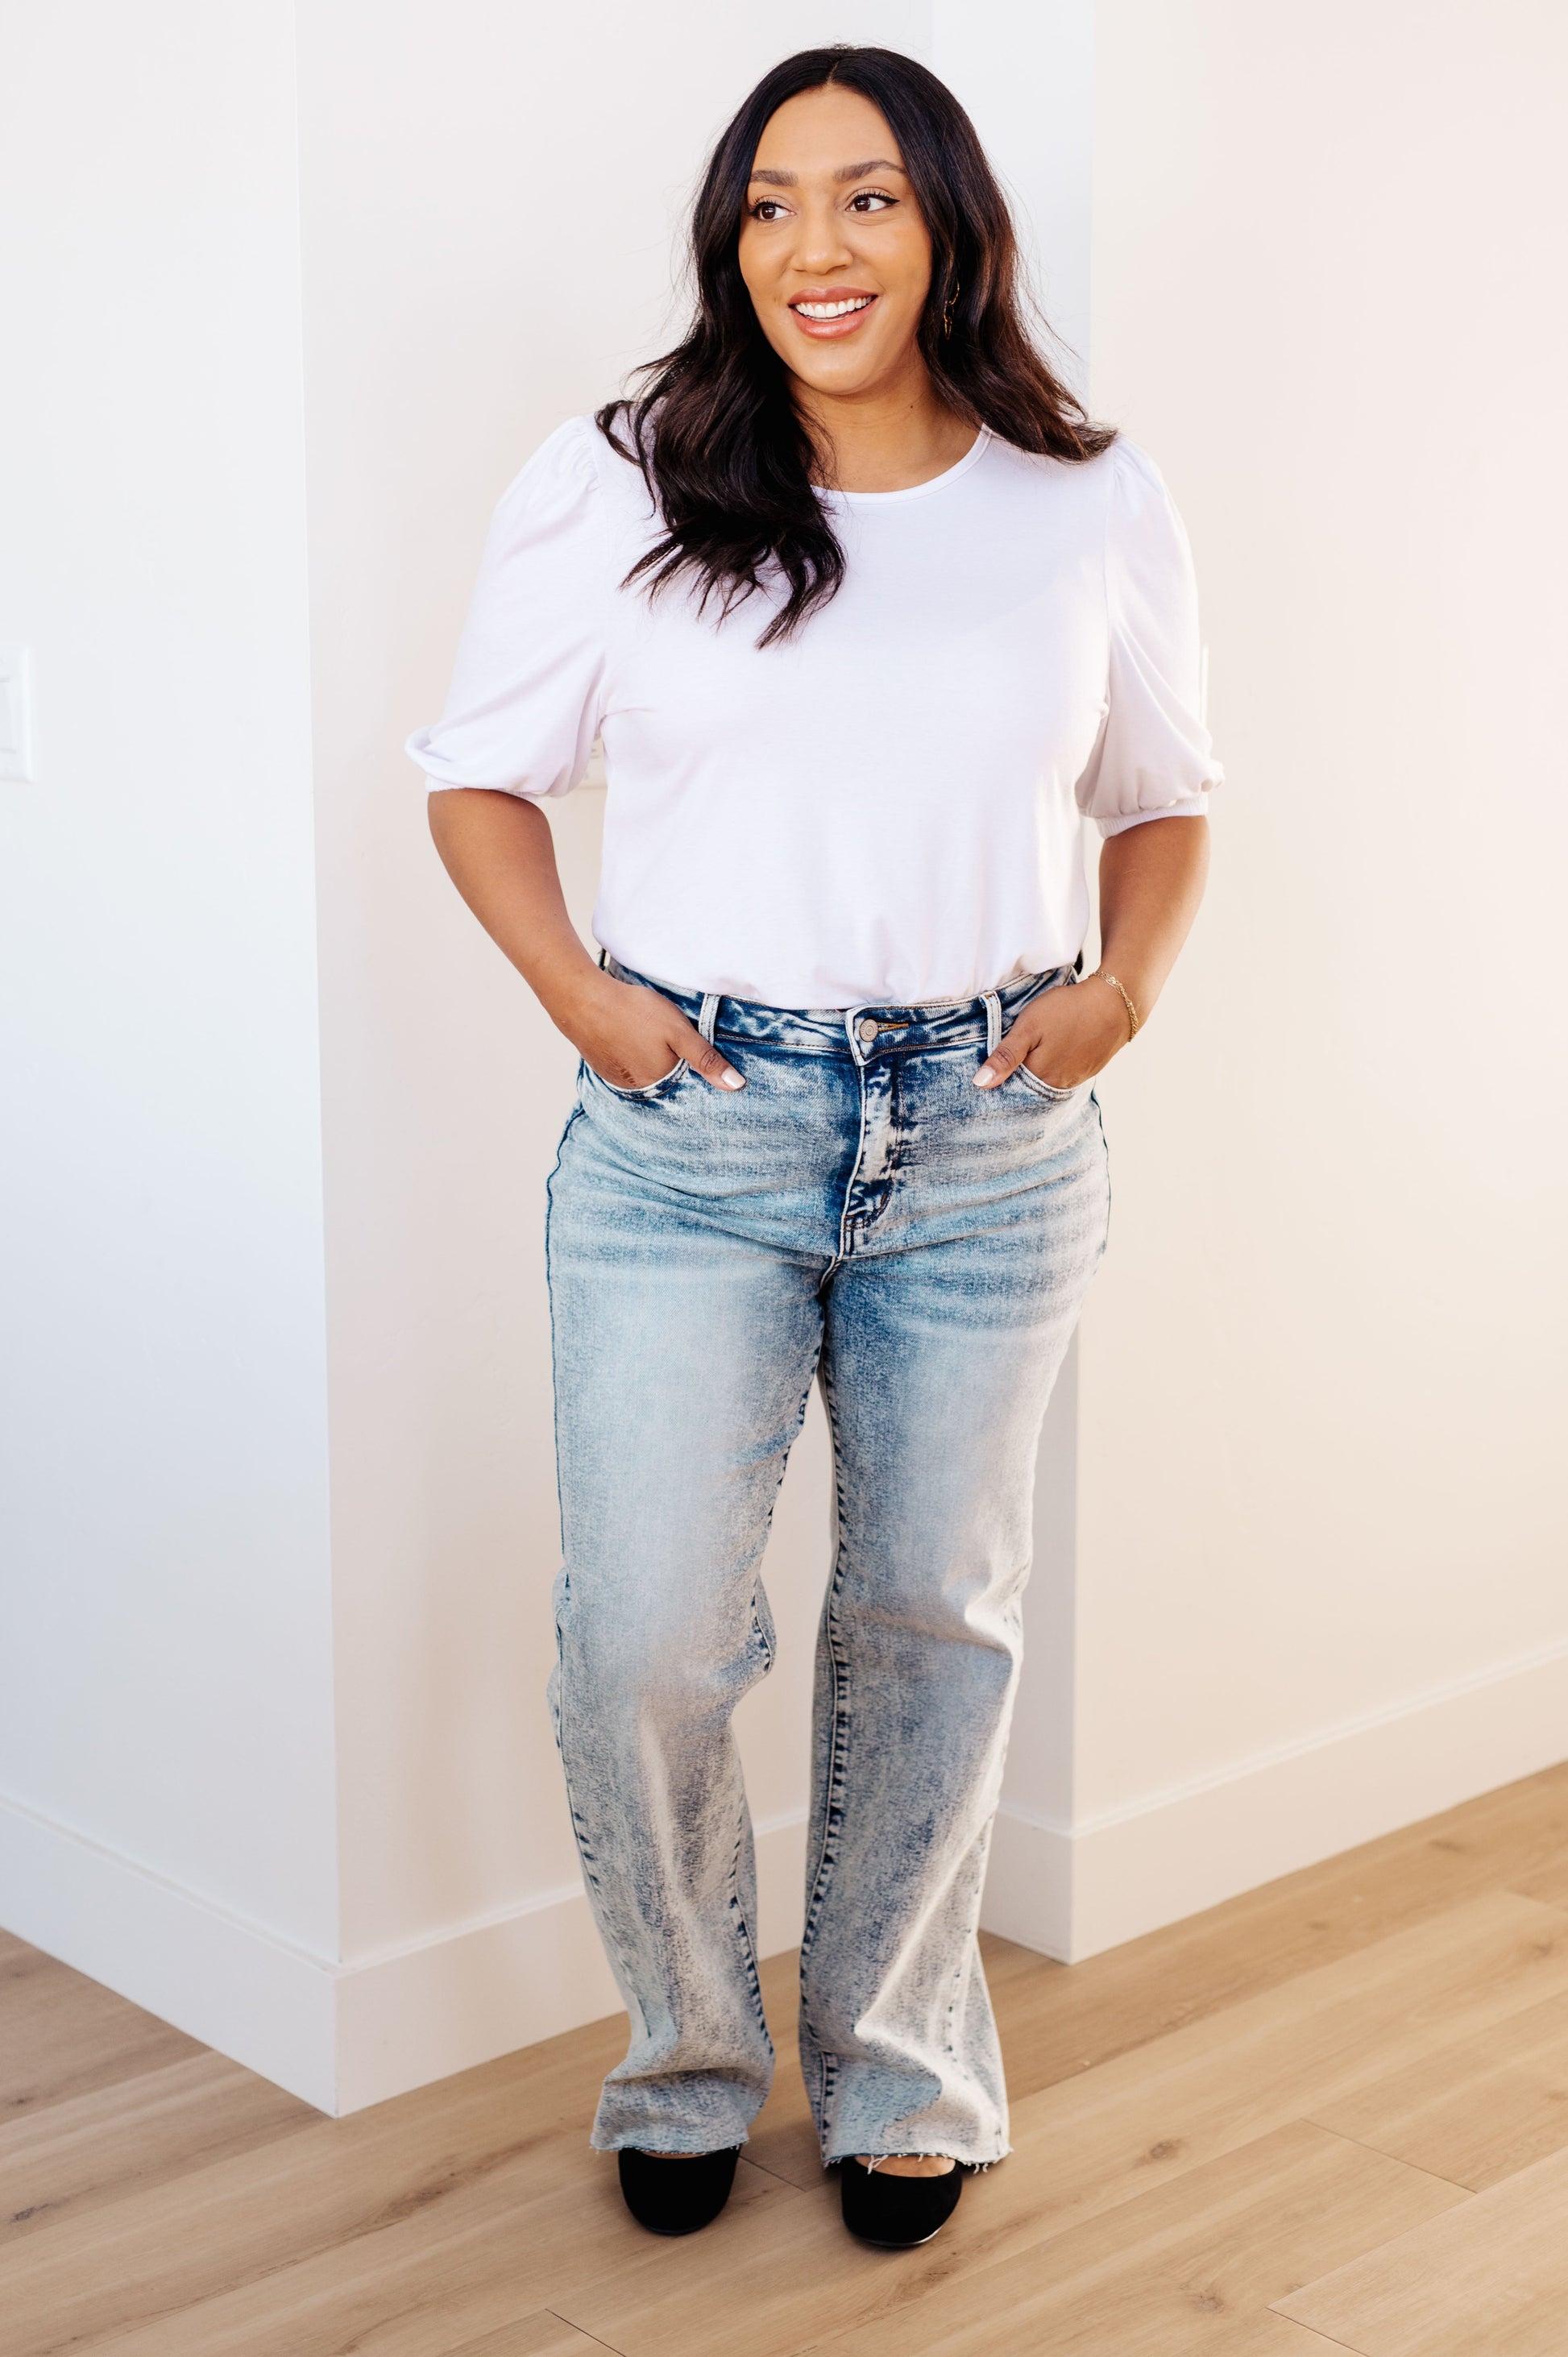 Get ready to elevate your denim game with our Dory High Waist Mineral Wash Raw Hem Wide Leg Jeans from Judy Blue. Designed for comfort with 4-way stretch and a high rise waist, these jeans will give you the perfect fit every time. The mineral wash and raw hem add a touch of style for a versatile and on-trend look 0 - 3X